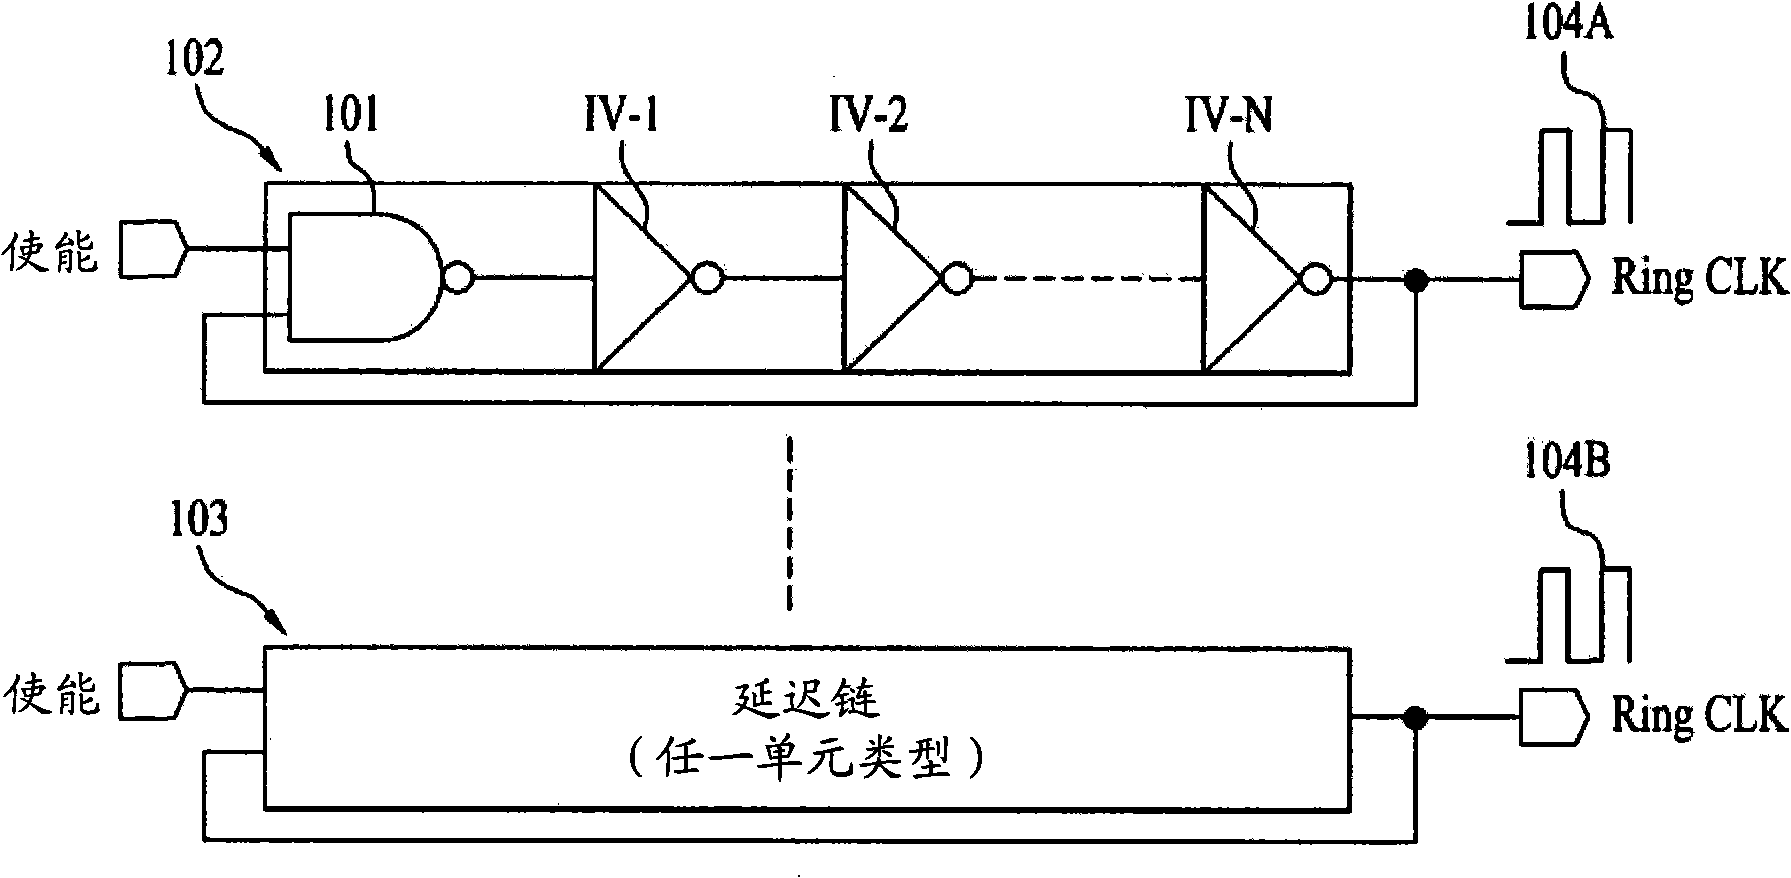 Measurement apparatus for improving performance of standard cell library